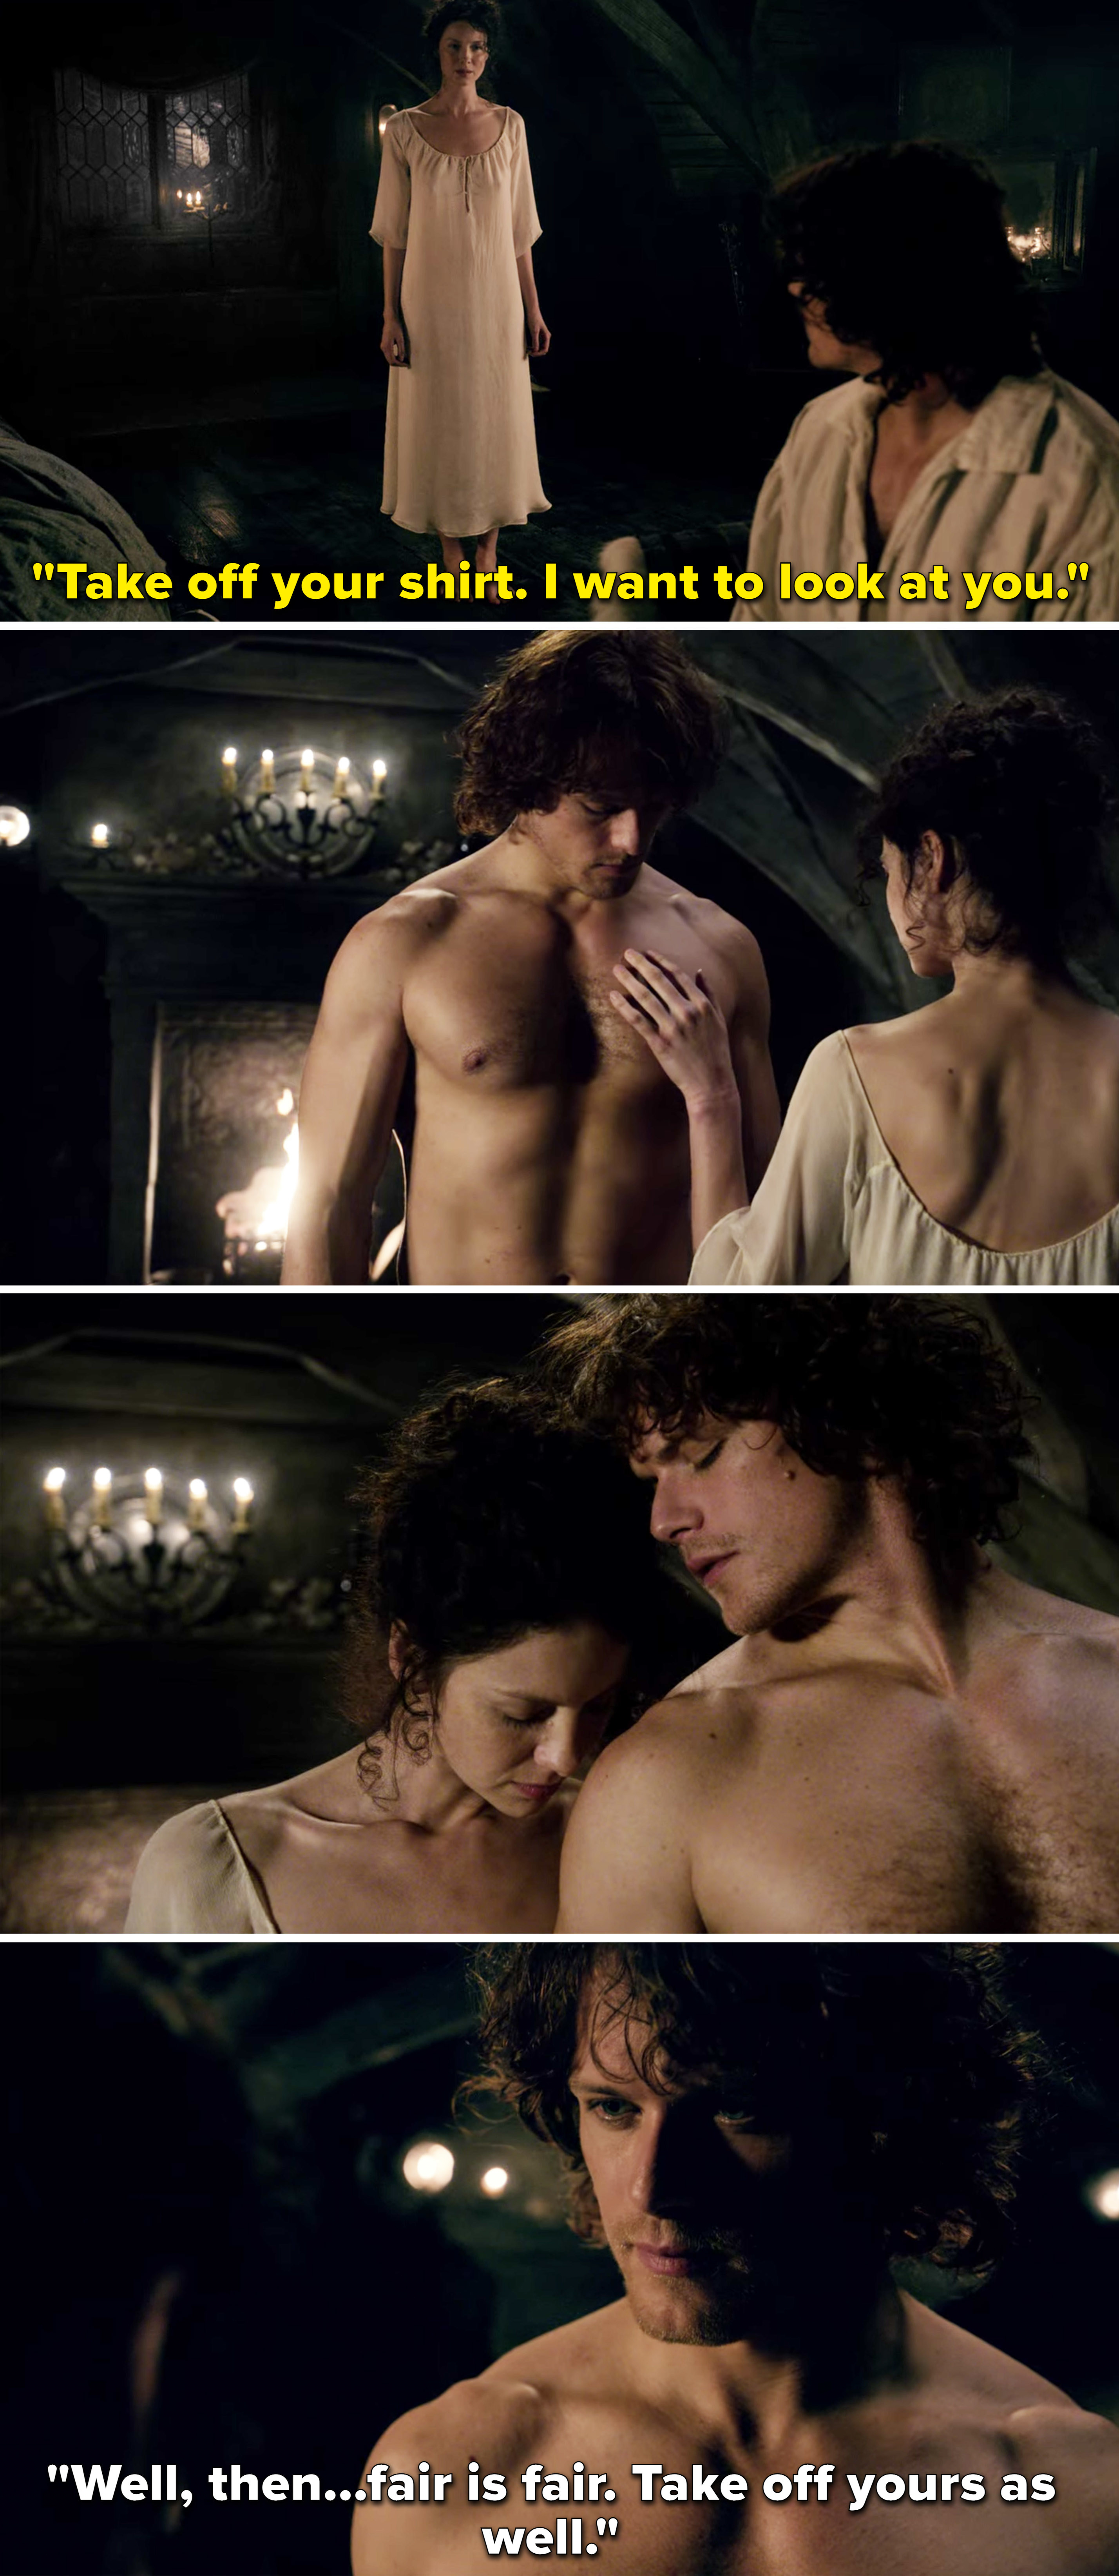 Jamie and Claire telling each other to take their shirts off on their wedding night